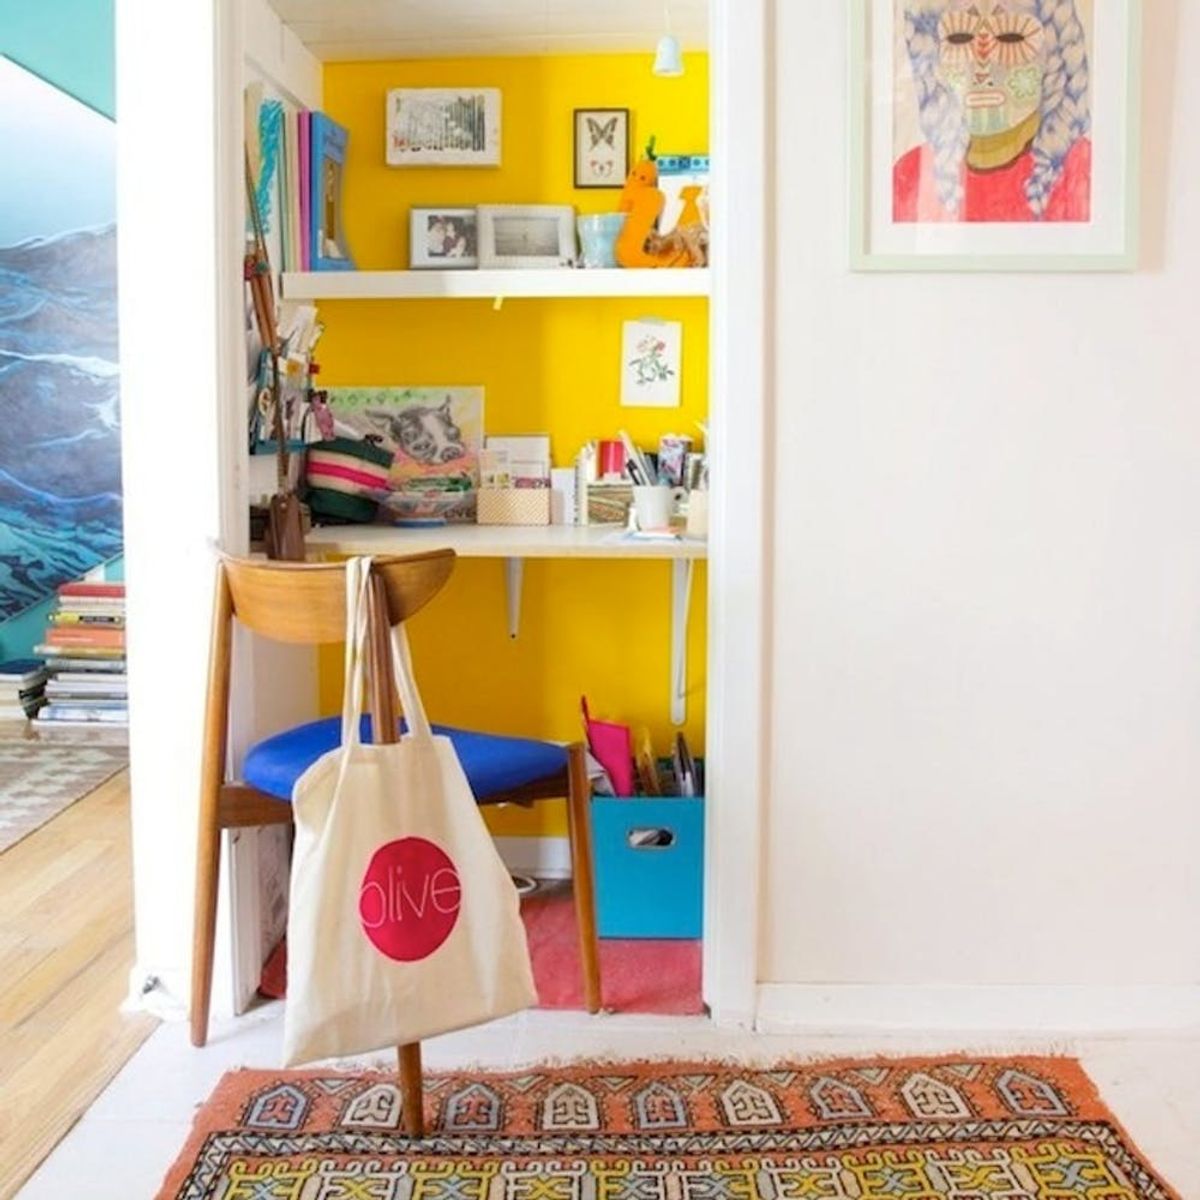 Small Space? 13 Creative Places to Fit a Home Office